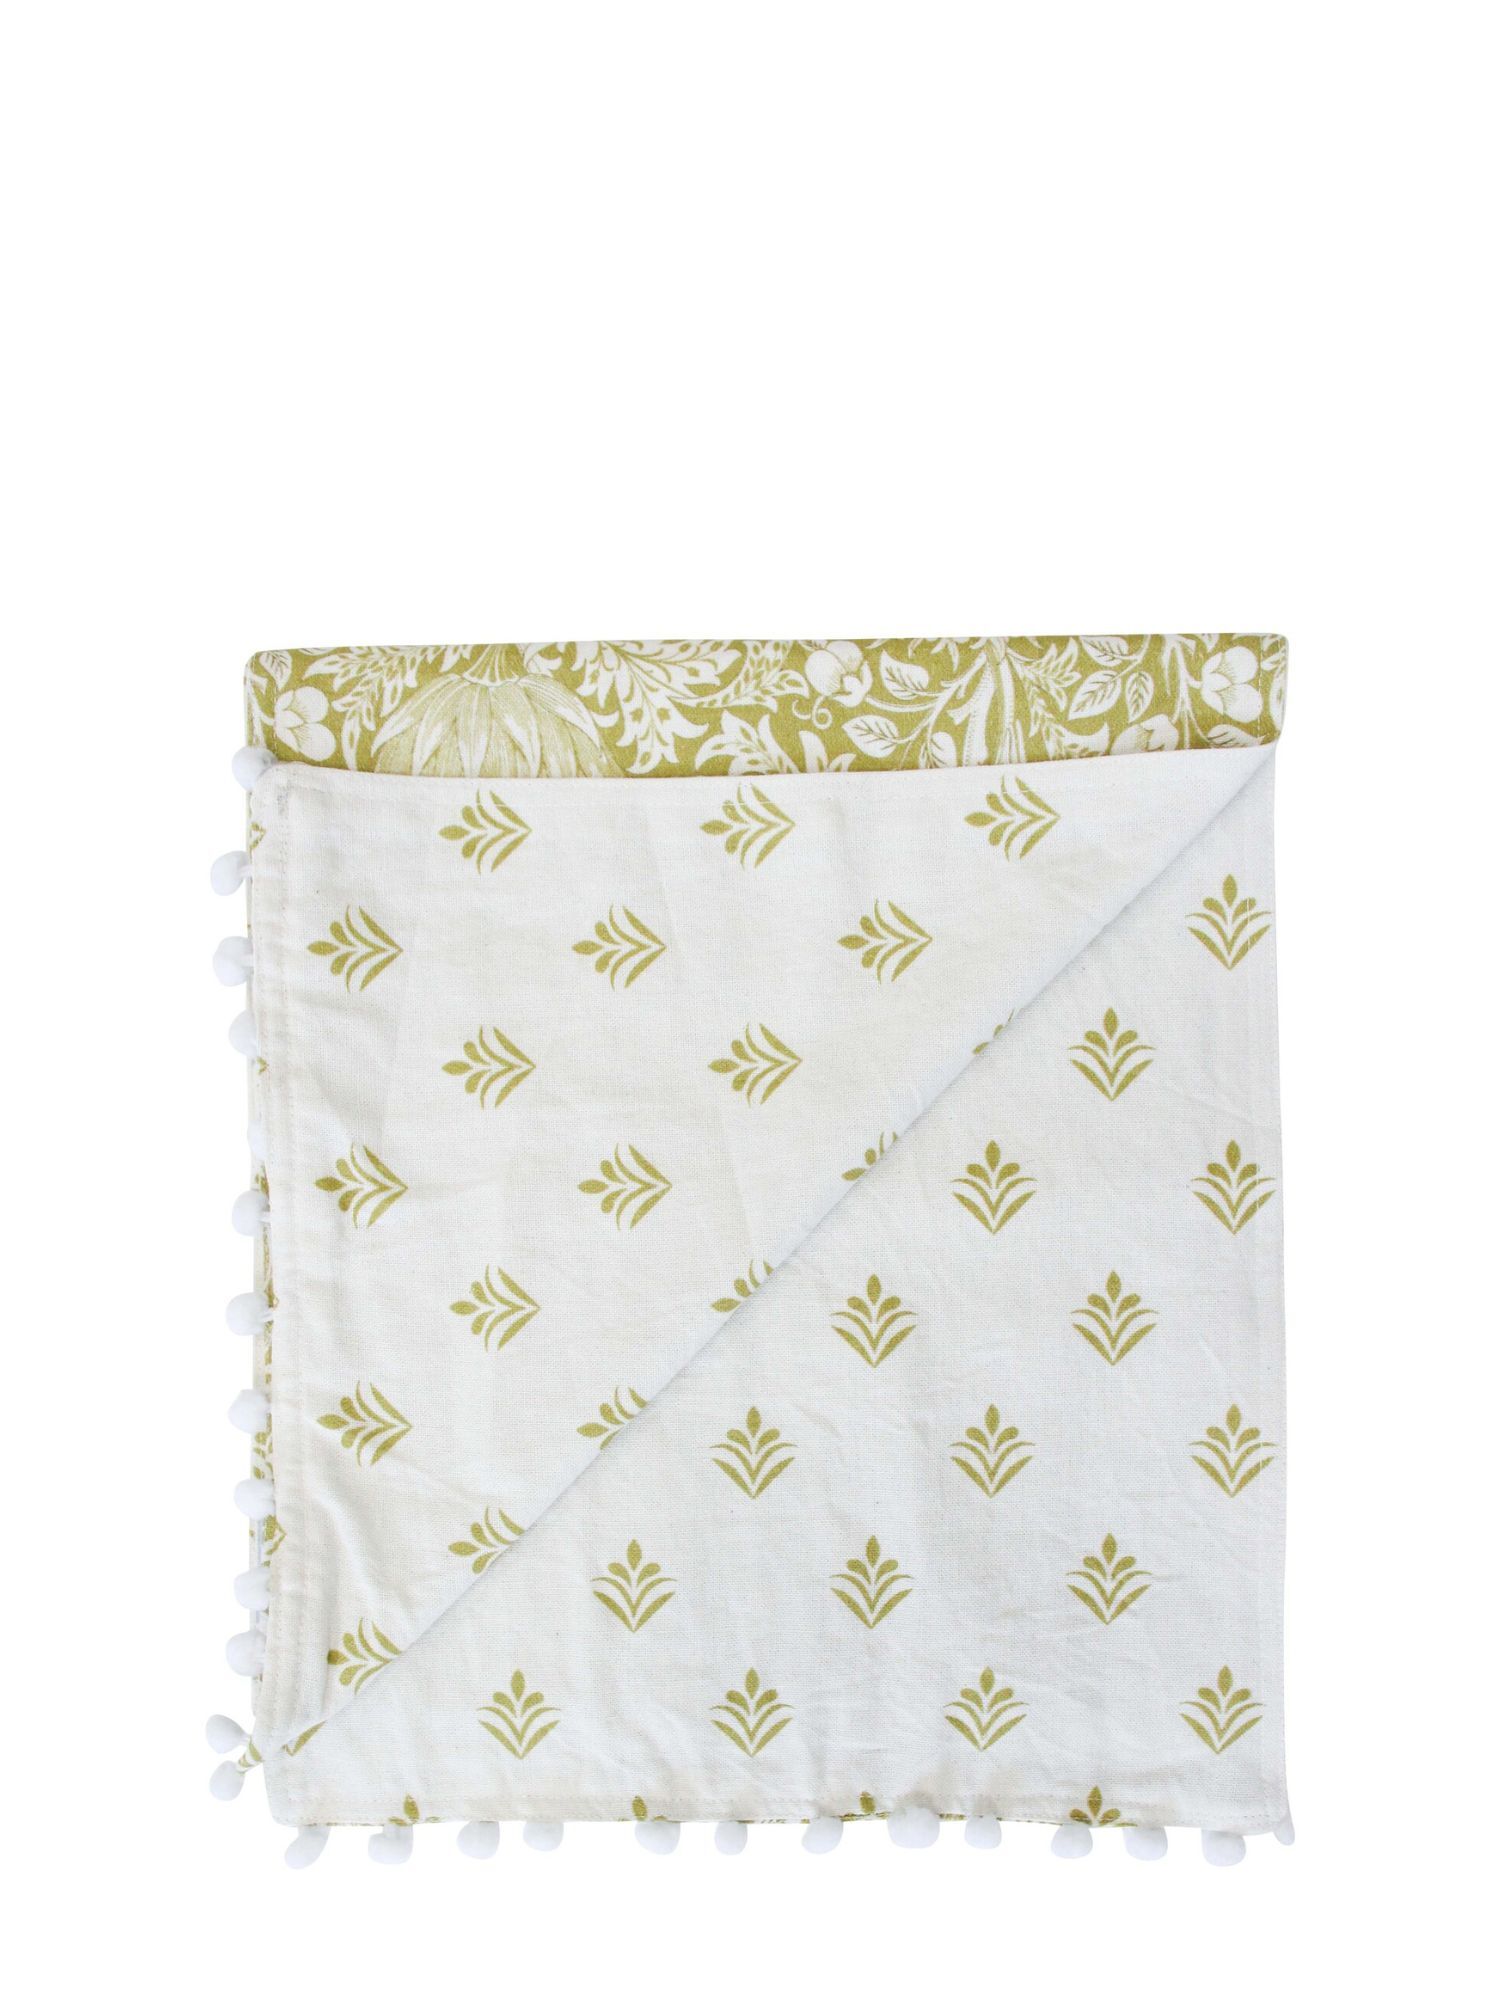 Gold and White 135cm x 30cm Cotton Table Runner